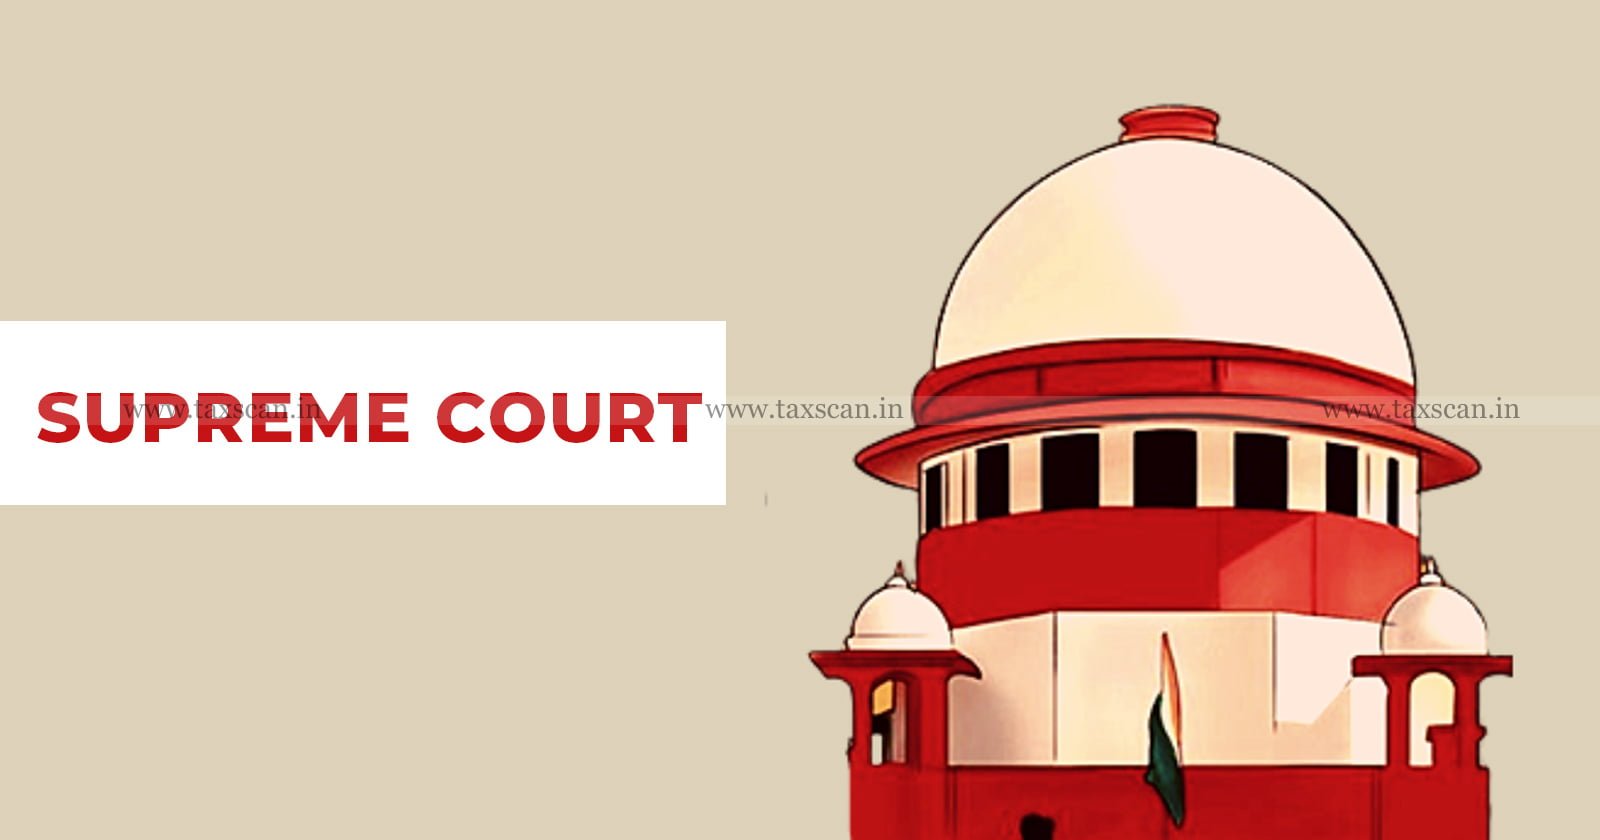 Purchase and Sale of Liquor - Sale of Liquor - Purchase of Liquor - Rajasthan Beverages Corporation Ltd - Supreme Court - TAXSCAN